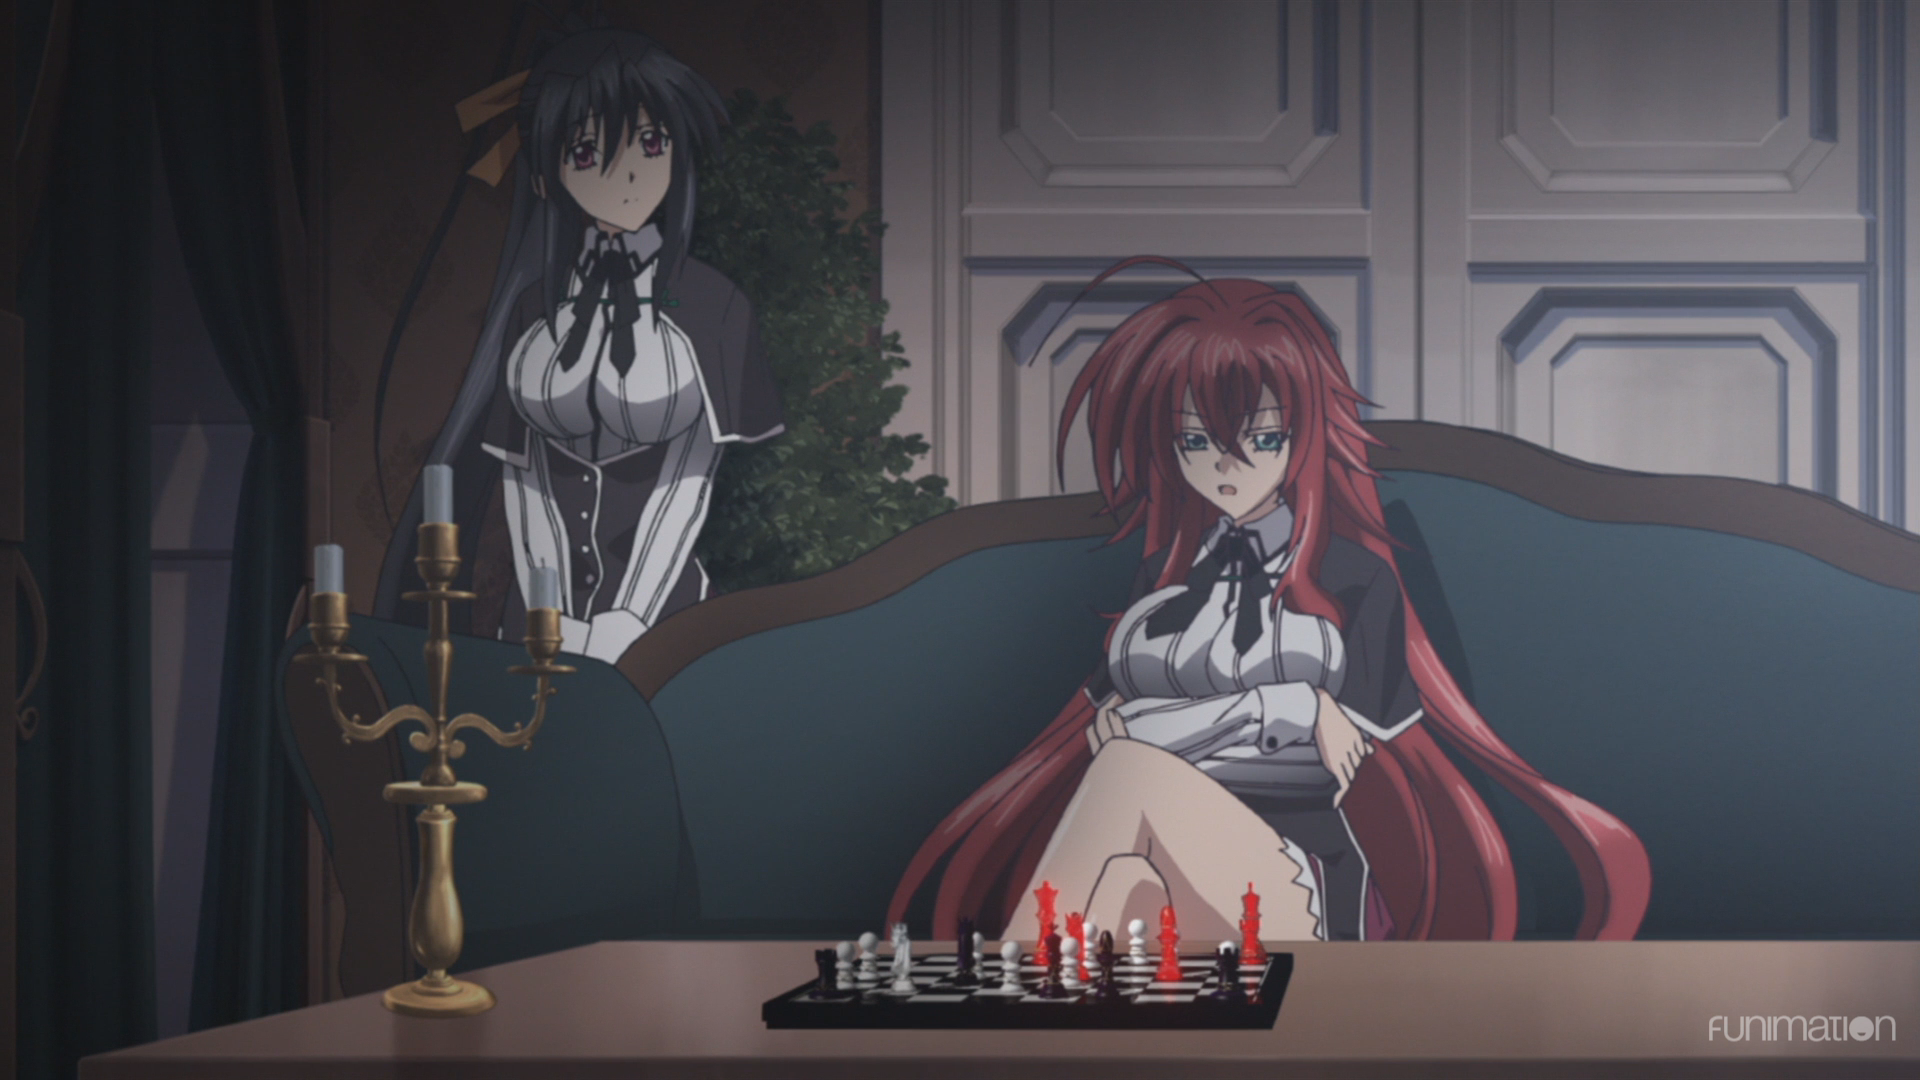 Best of All episodes of highschool dxd